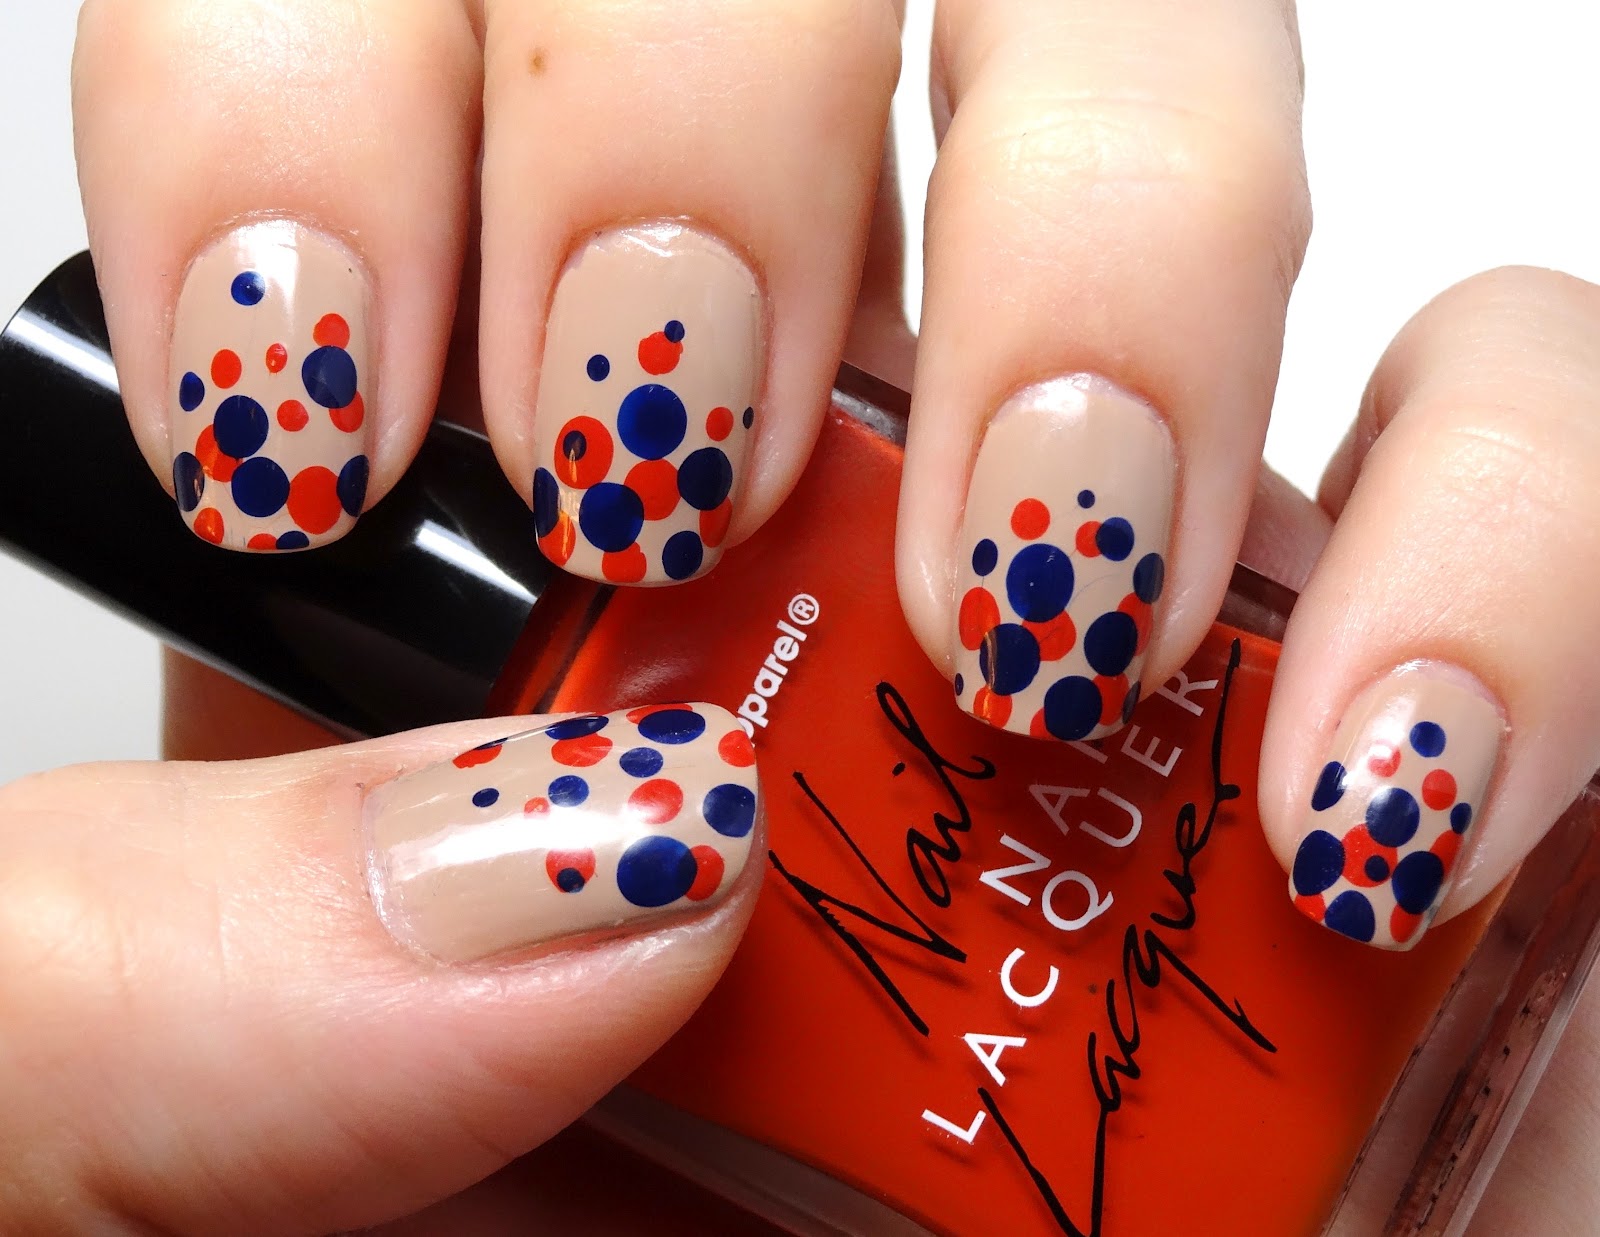 Frivolous Finishes: Copycat Dot Manicure - So cute I had to steal it!